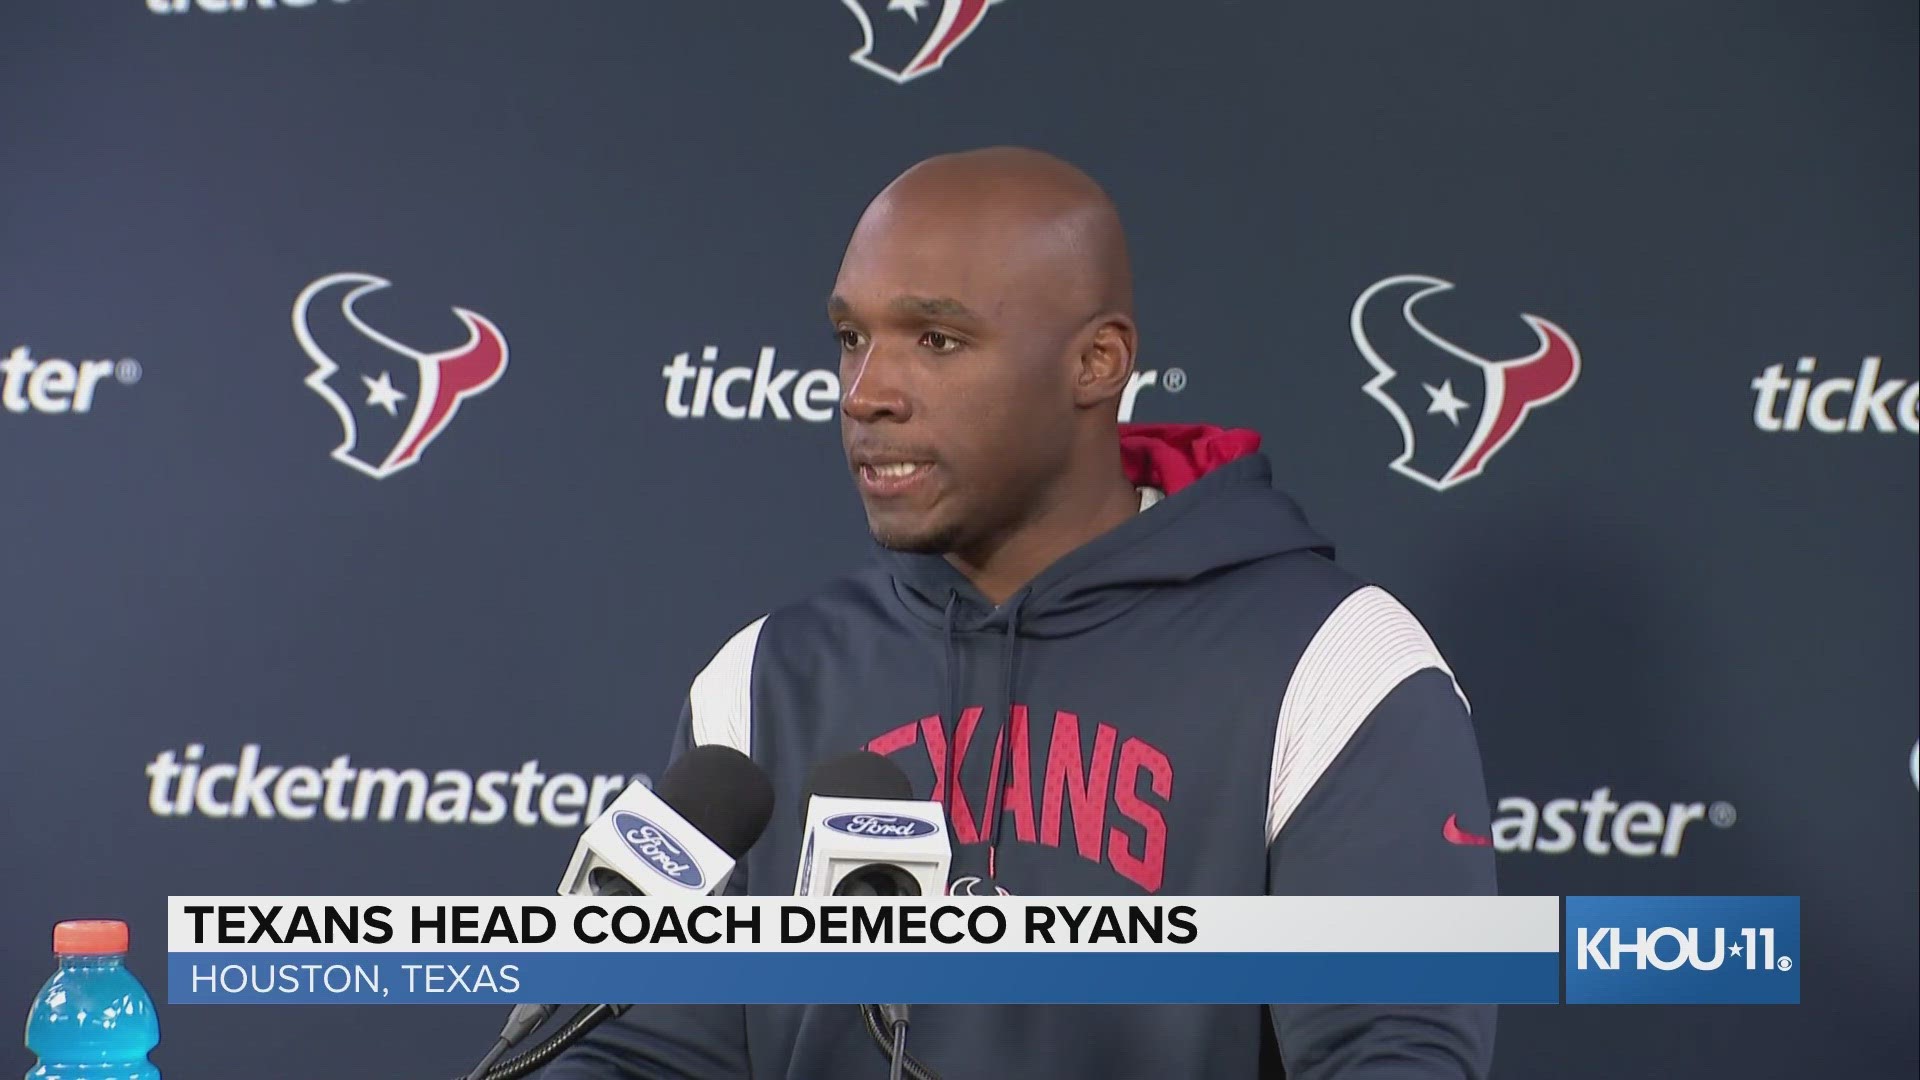 Houston Texans coach DeMeco Ryans took questions from the media after the team punched their ticket to the AFC divisional round.